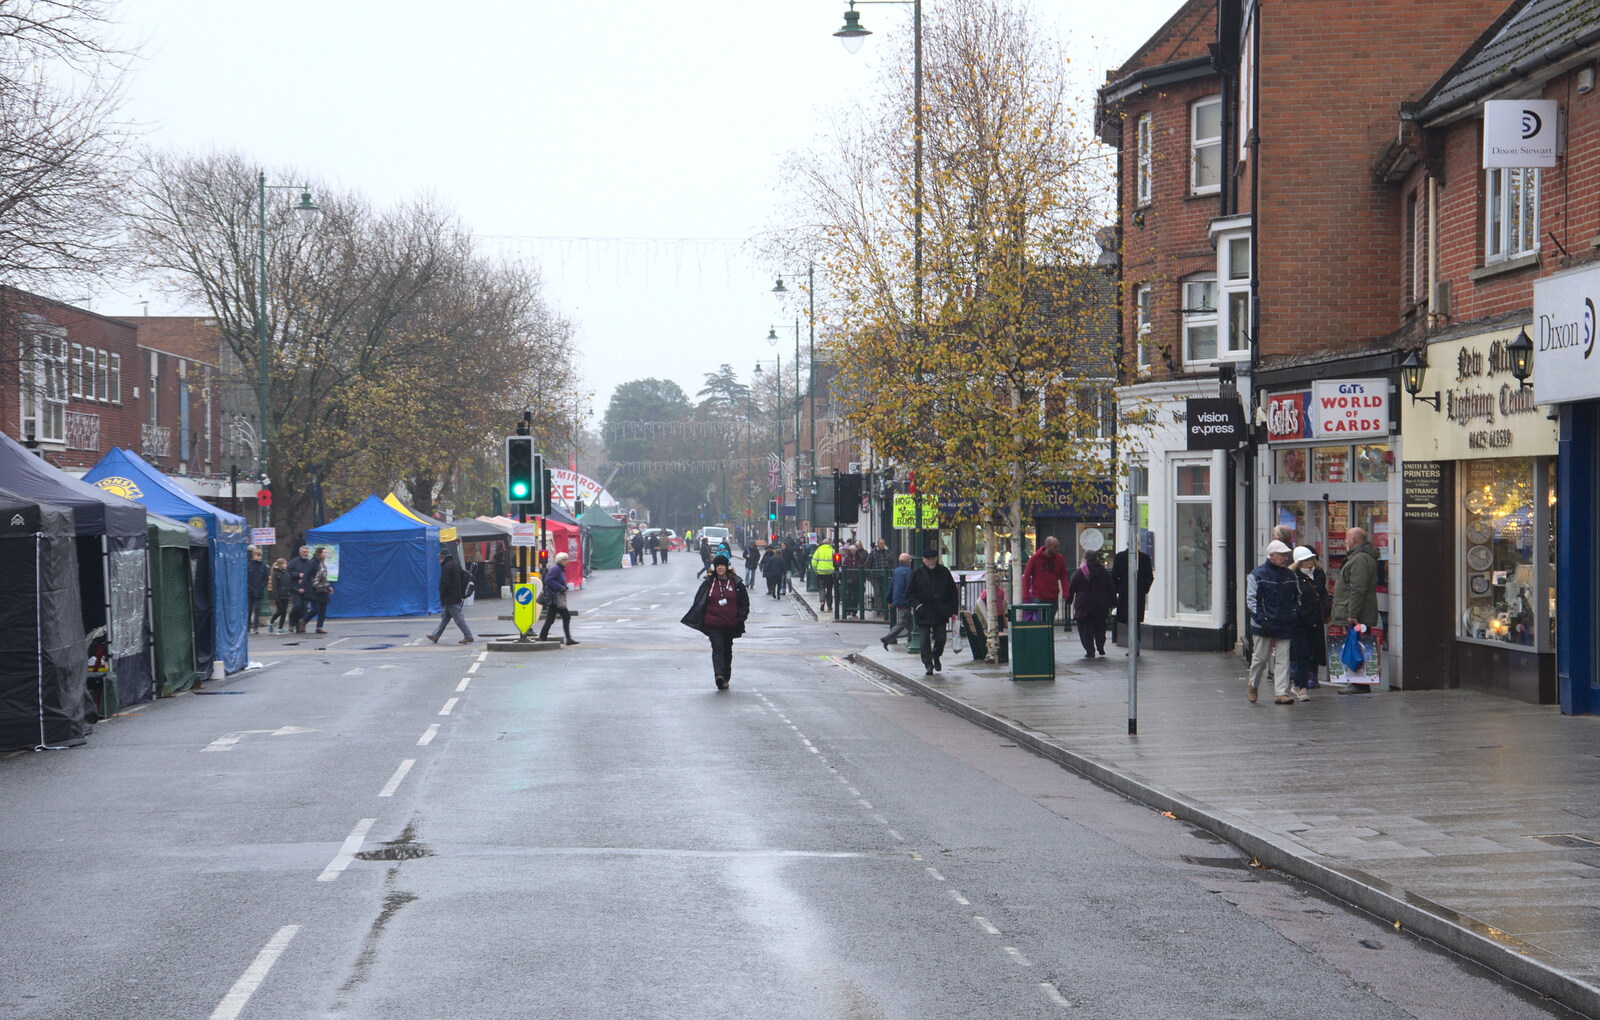 Looking back down Station Road from A Christmas Market, New Milton, Hampshire - 24th November 2018